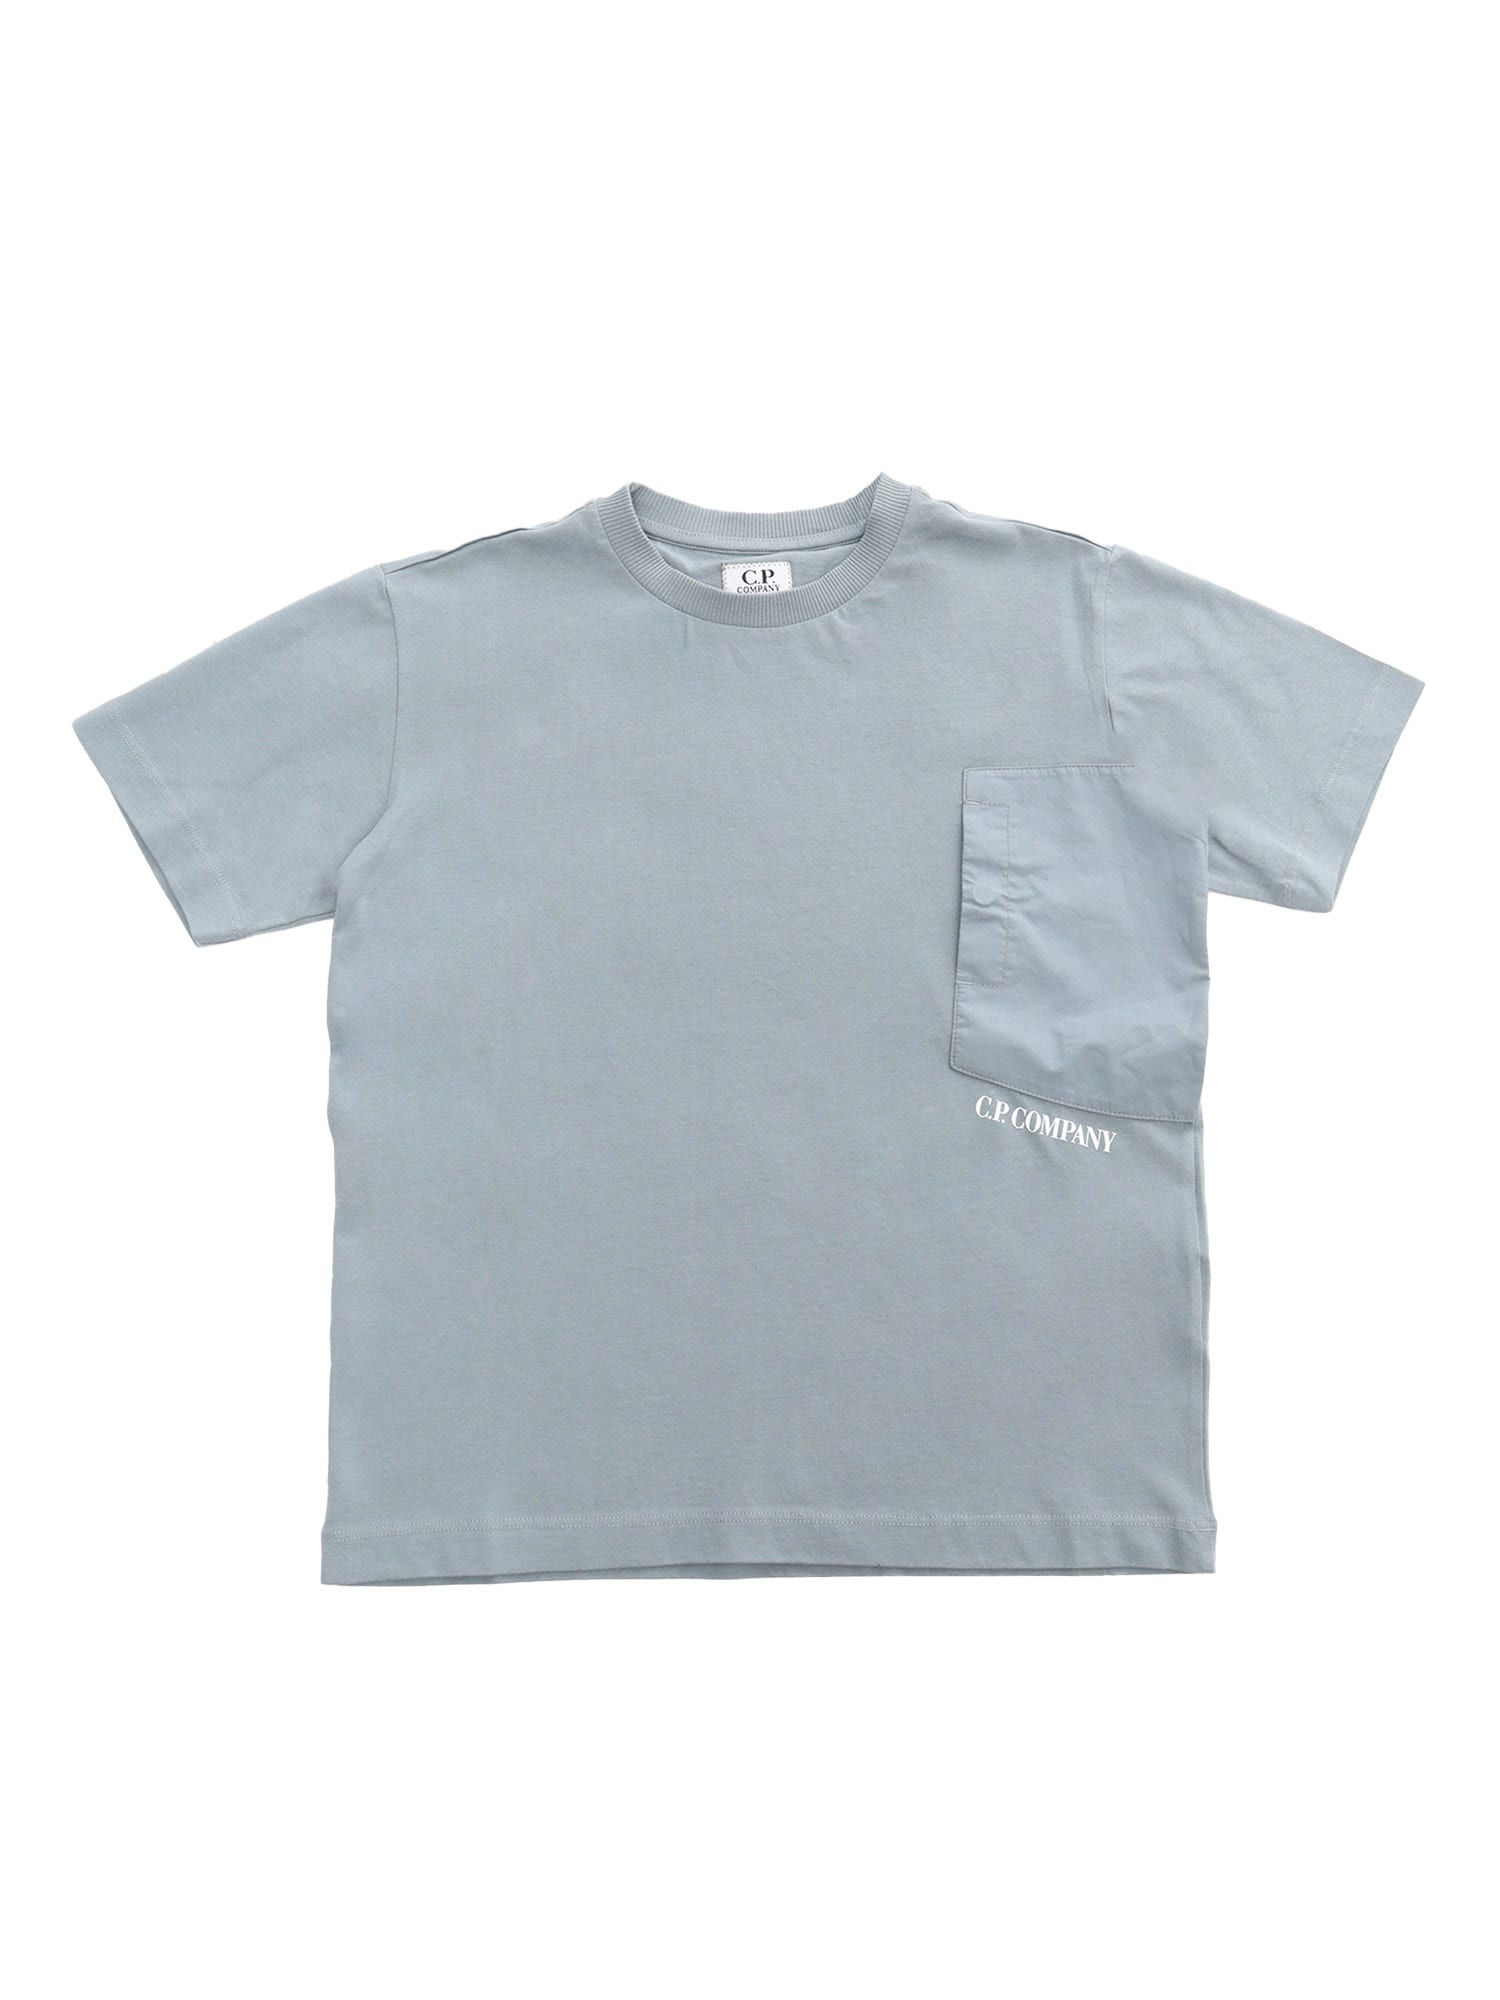 C.p. Company Undersixteen Kids' Gray T-shirt With Pocket In Blue